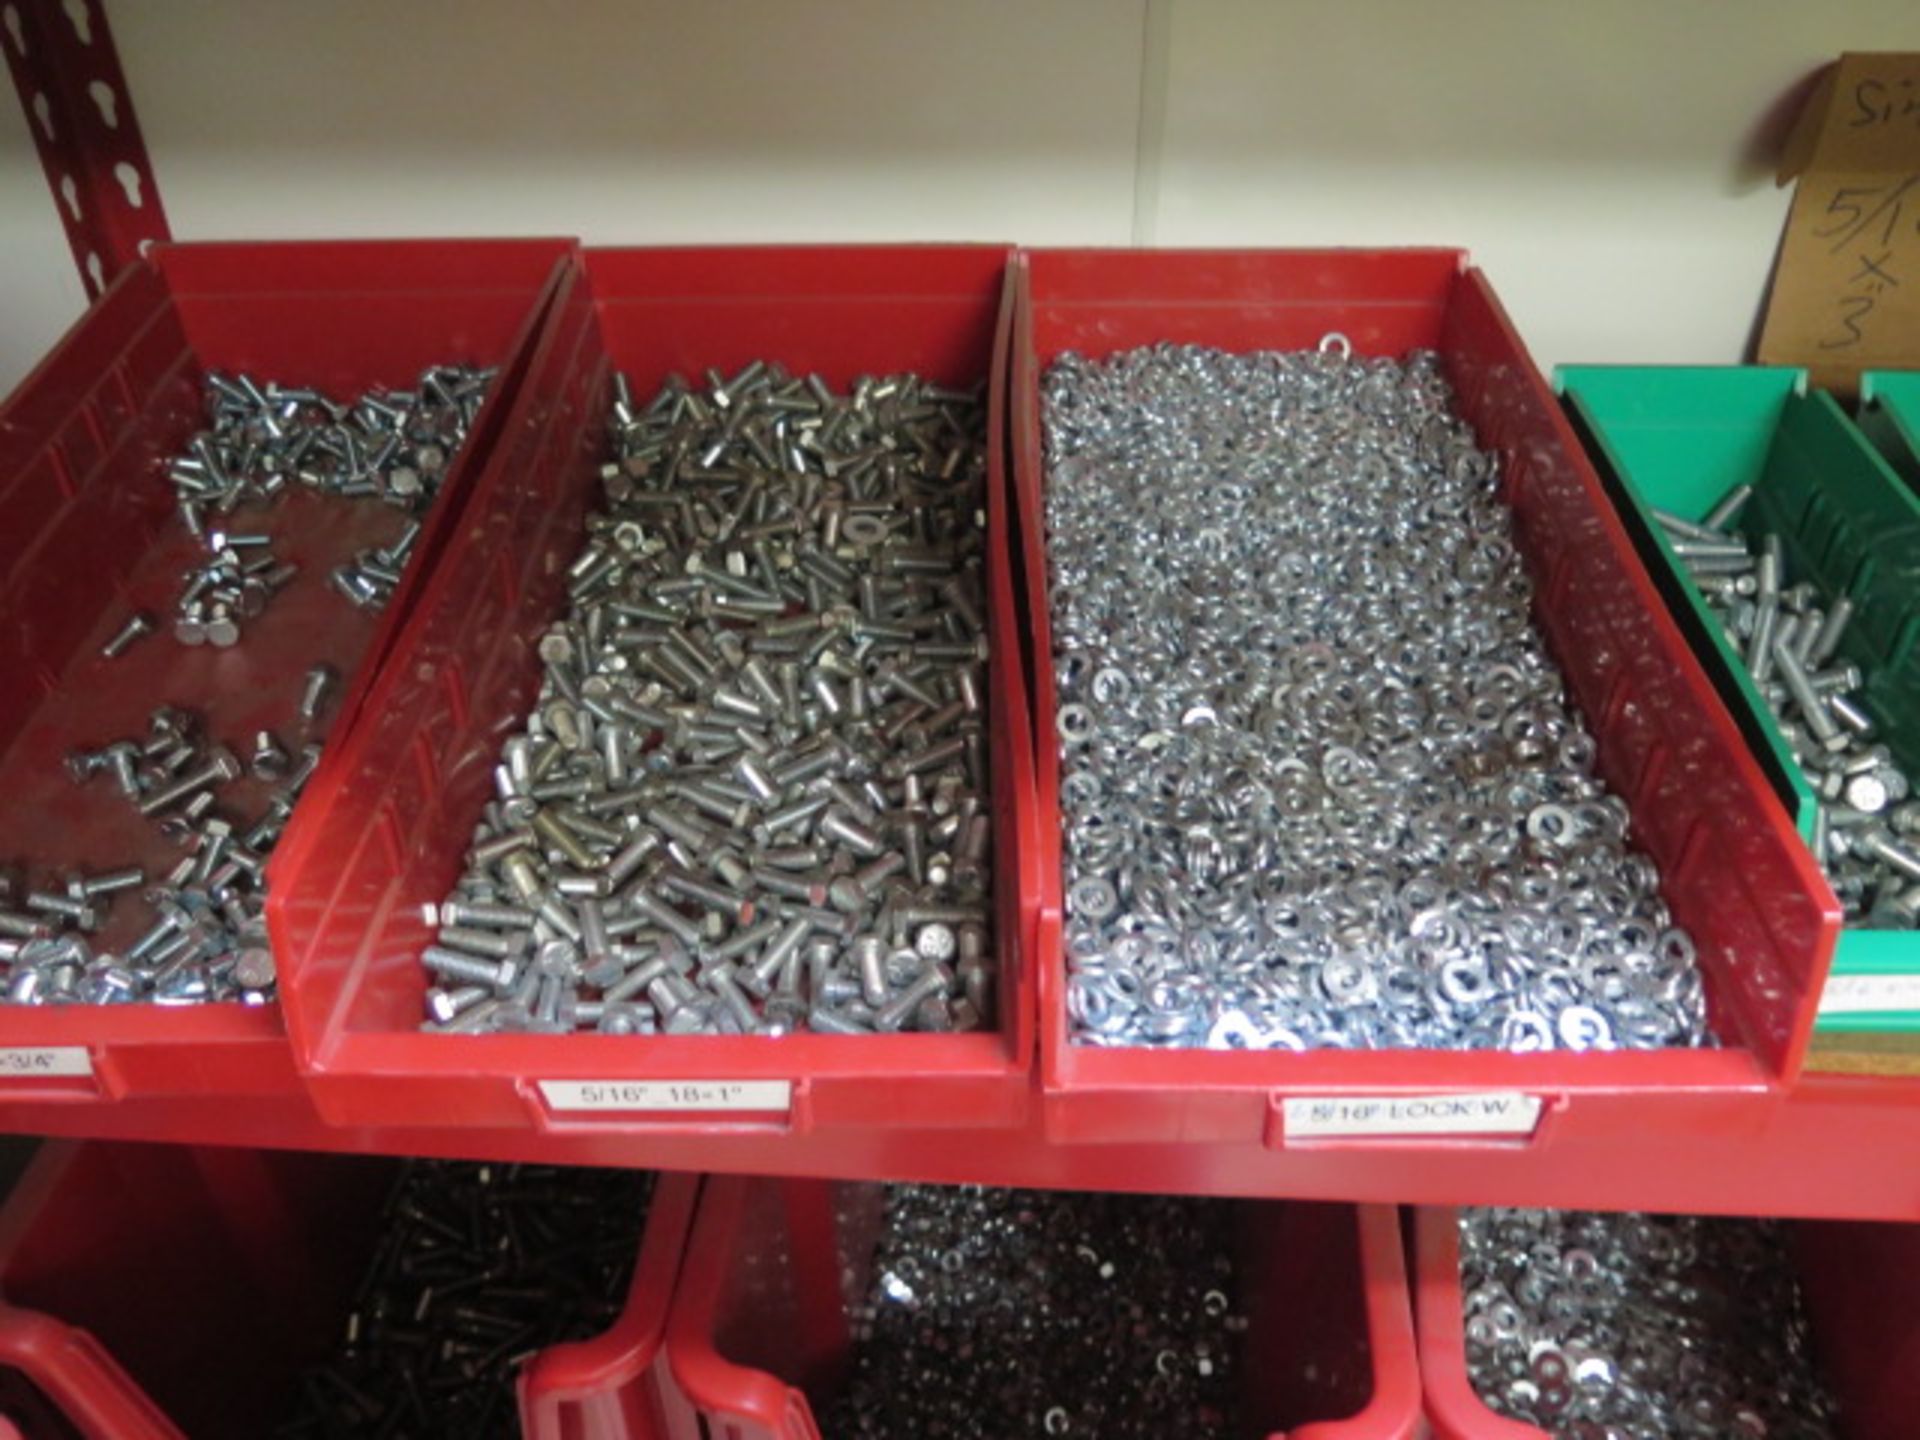 Large Quantity of Stainless Steel, Zink, Nylon Hardware and Anchor Bolts w/ Storage Bins and - Image 11 of 13